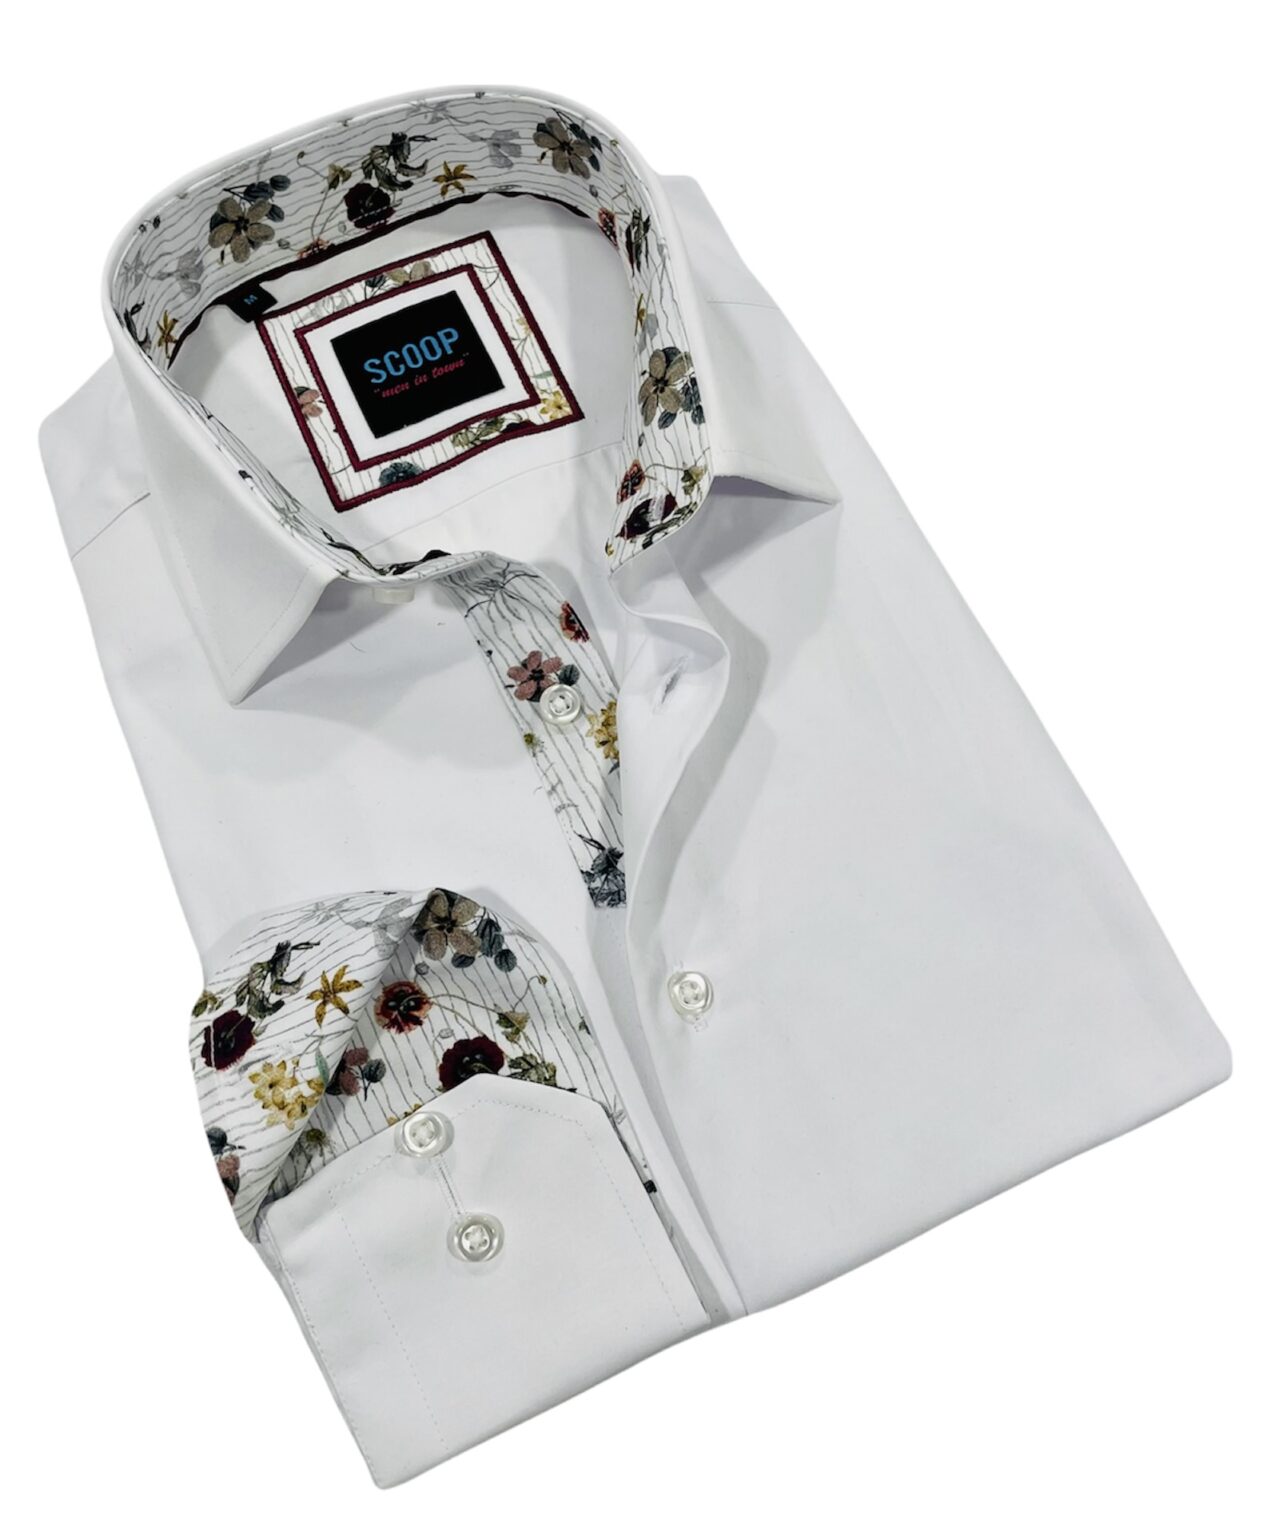 This versatile, white dress shirt from Scoop is a must-have in any man's business wardrobe. The fun pattern inside the collar and cuffs adds enough character to this men's top from Scoop, separating it from your plain white shirts.